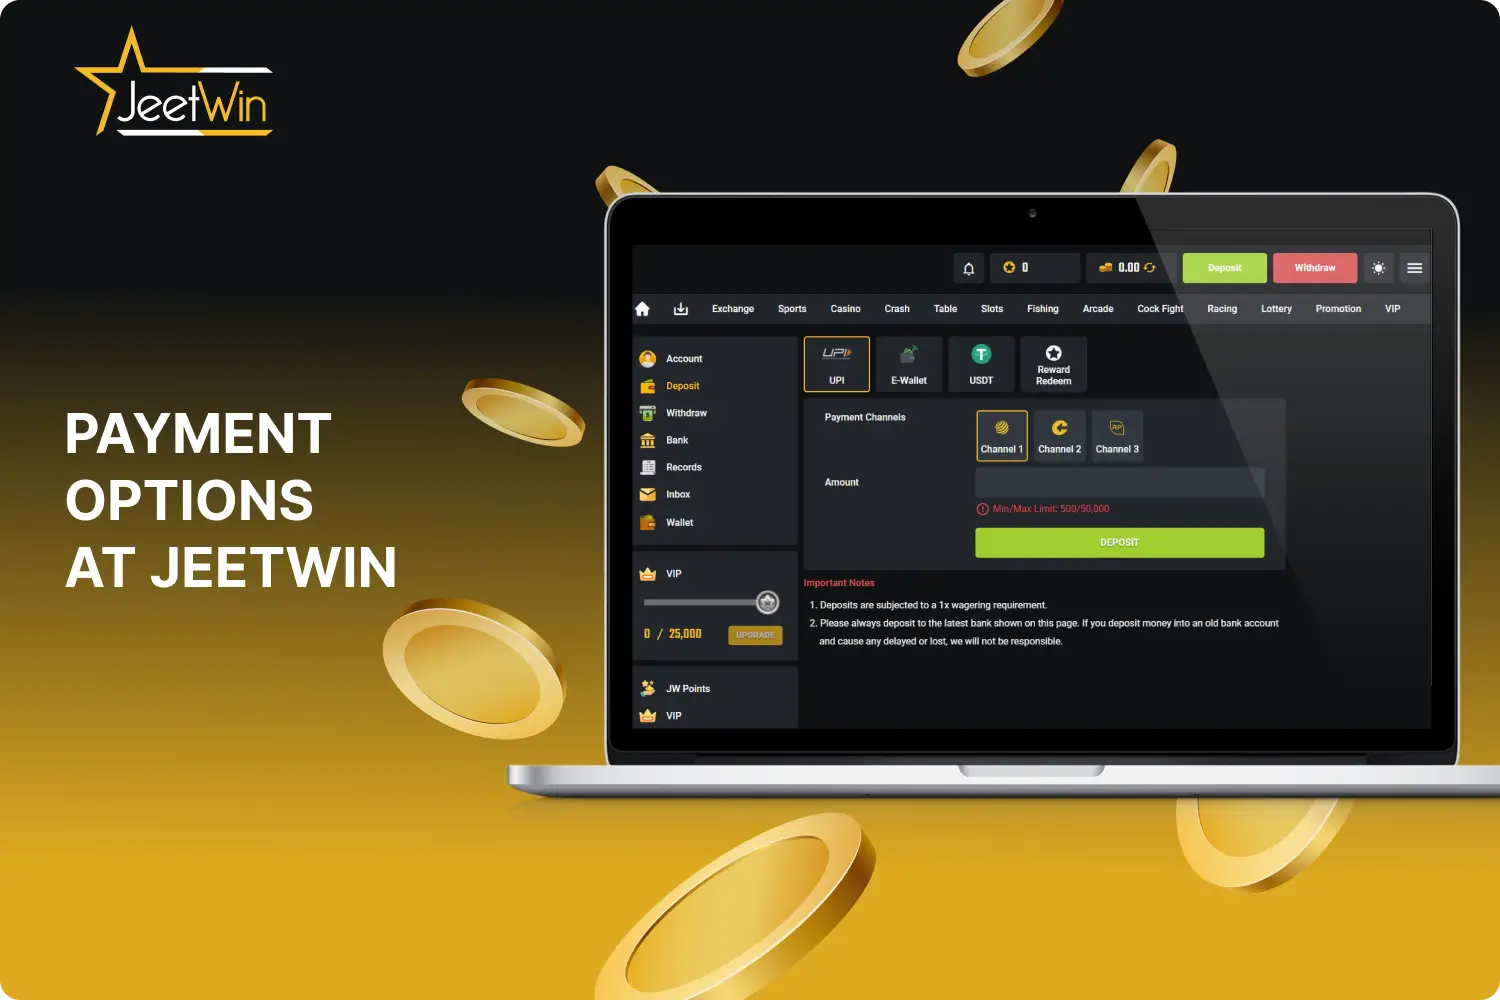 Various payment options are available to Jeetwin users for both deposits and withdrawals